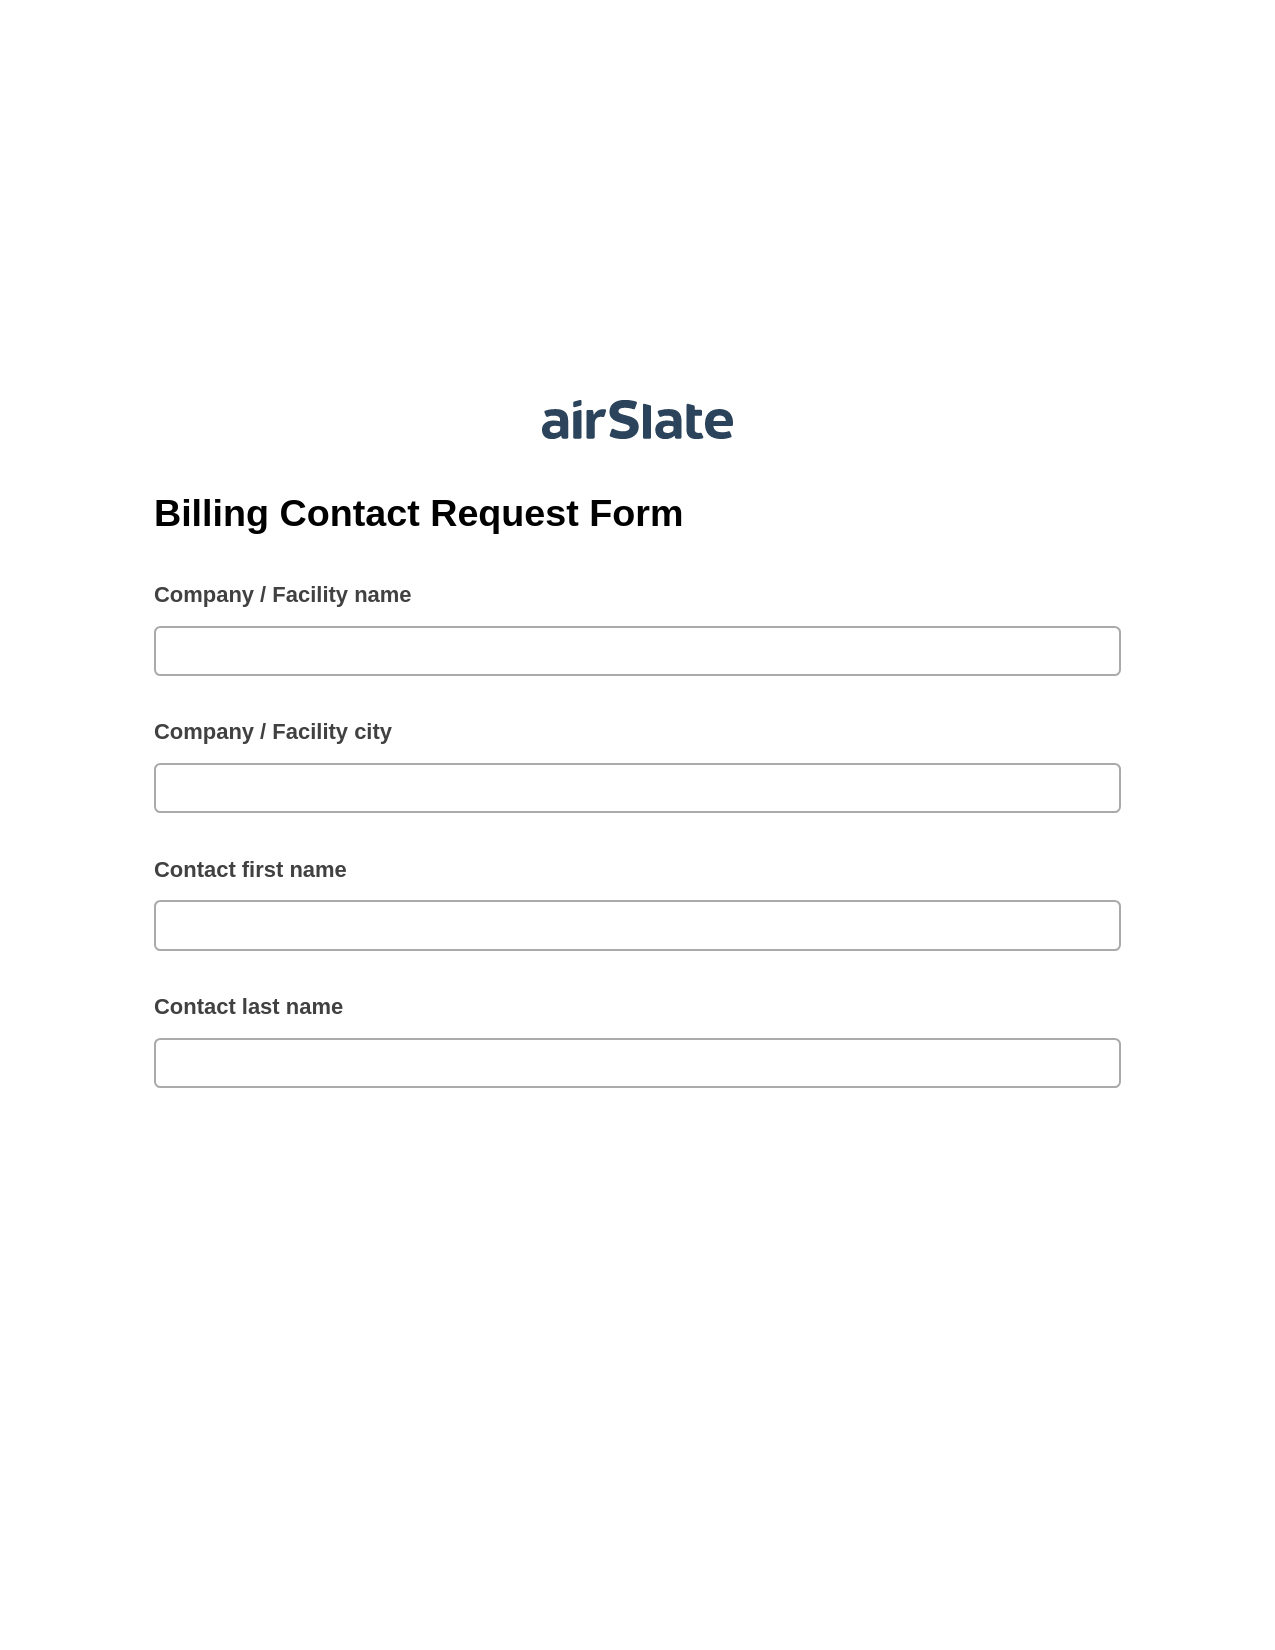 Multirole Billing Contact Request Form Pre-fill Dropdowns from CSV File Bot, Google Cloud Print Bot, Post-finish Document Bot